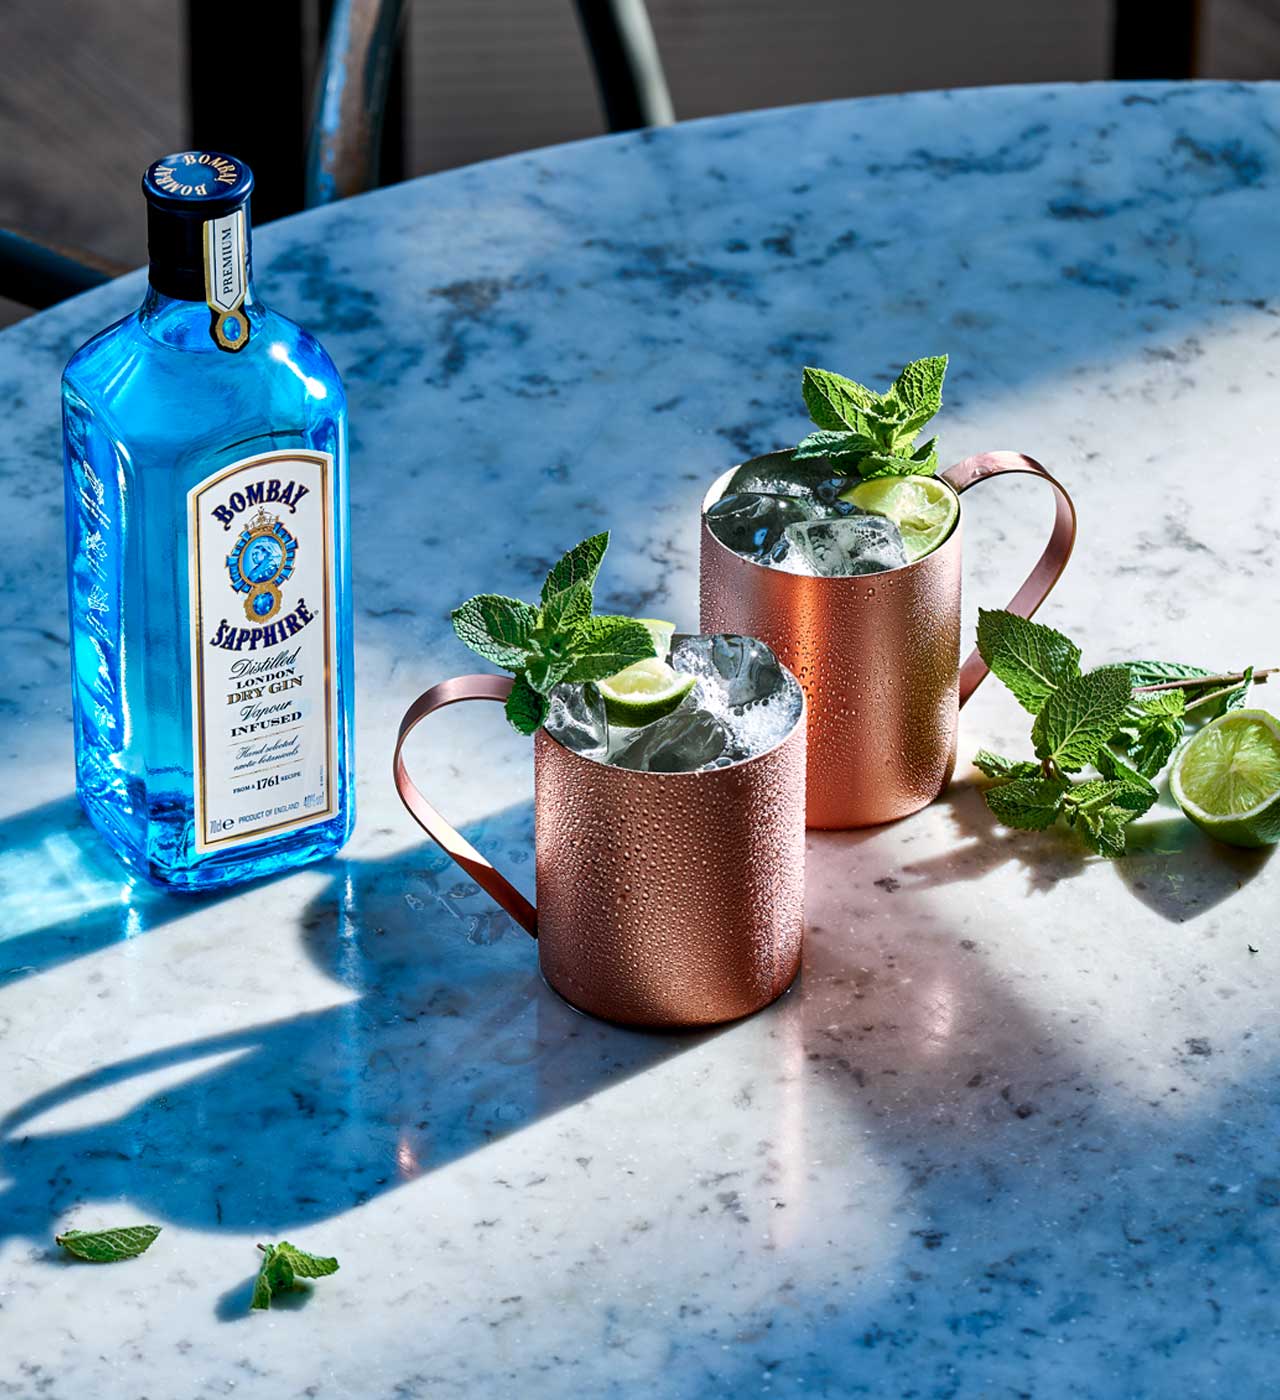 Gin Mule Cocktail Recipe | How to make a Gin Mule | Bombay Sapphire